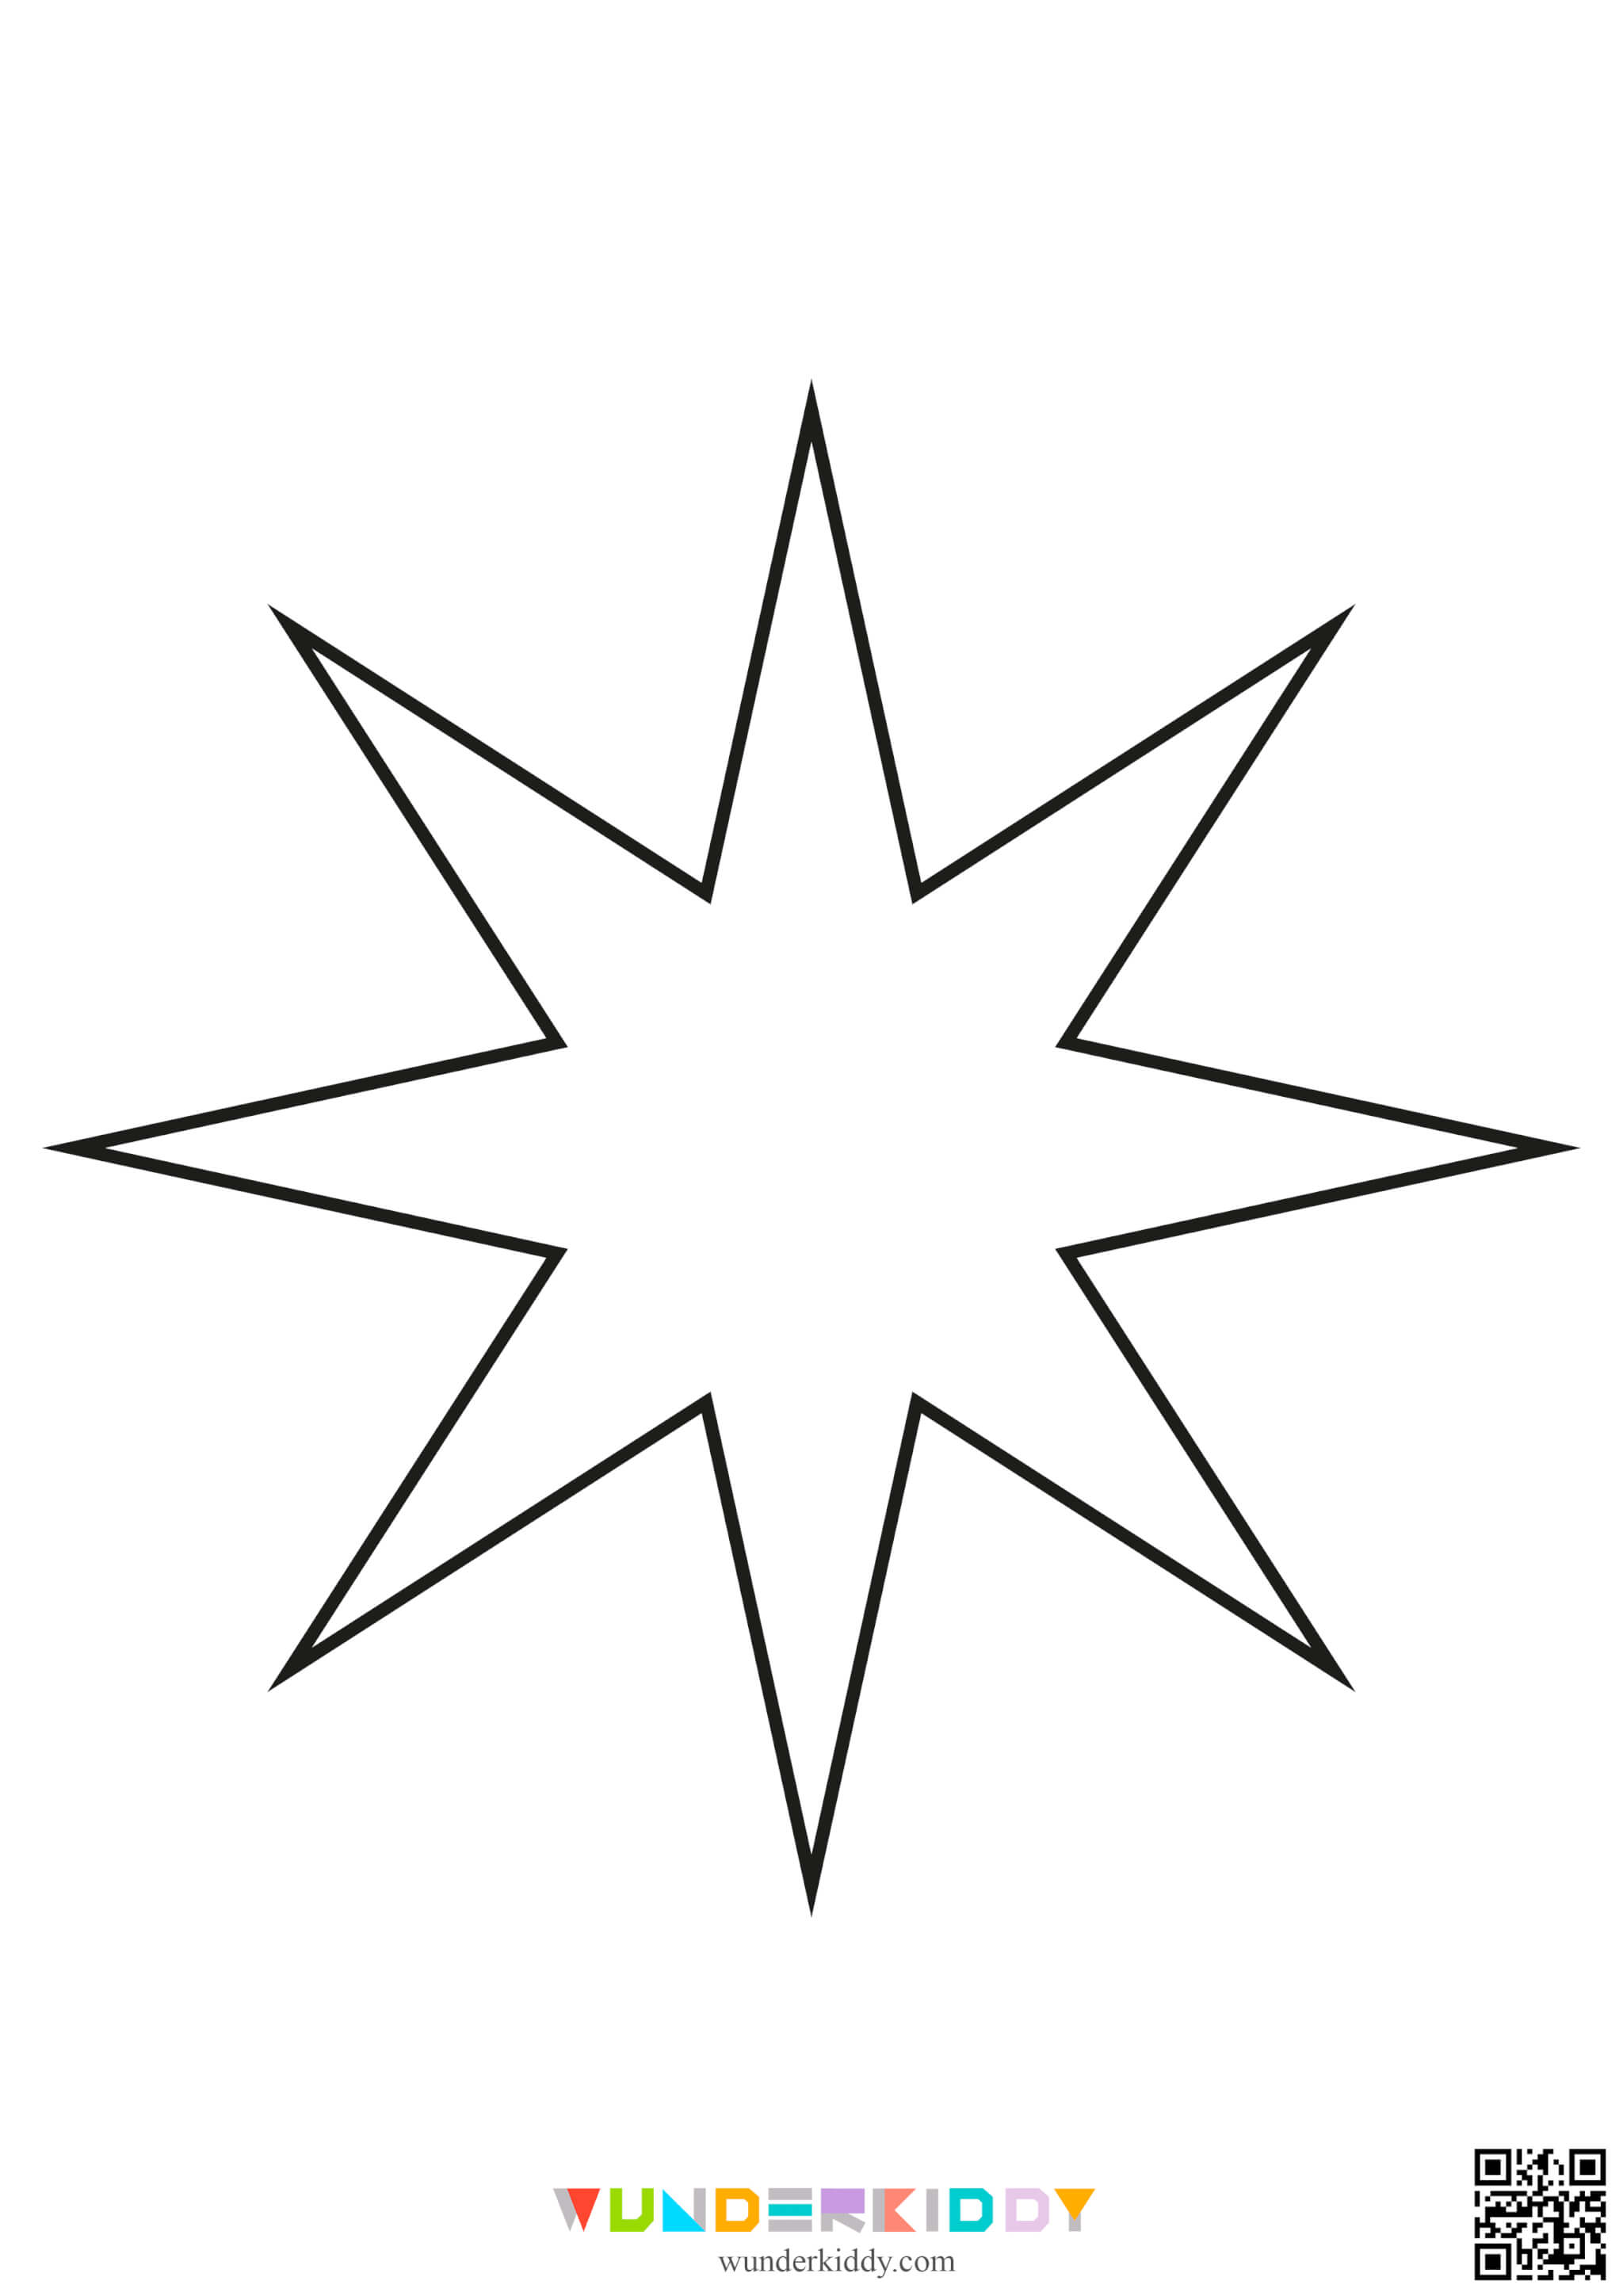 Star Outlines Templates - Image 12